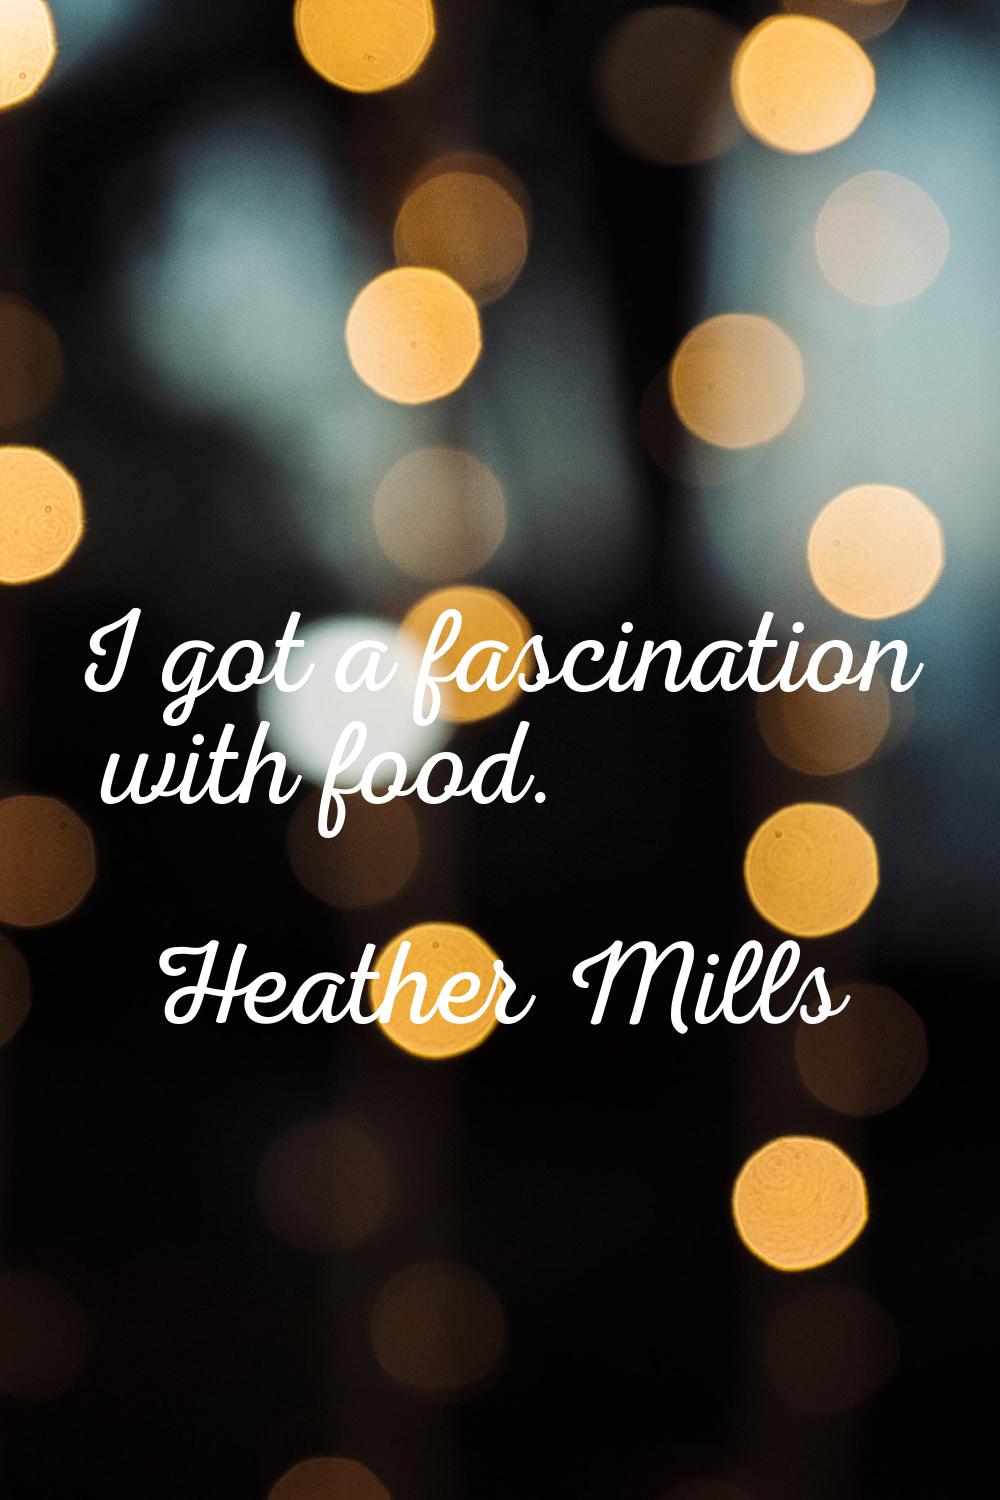 I got a fascination with food.